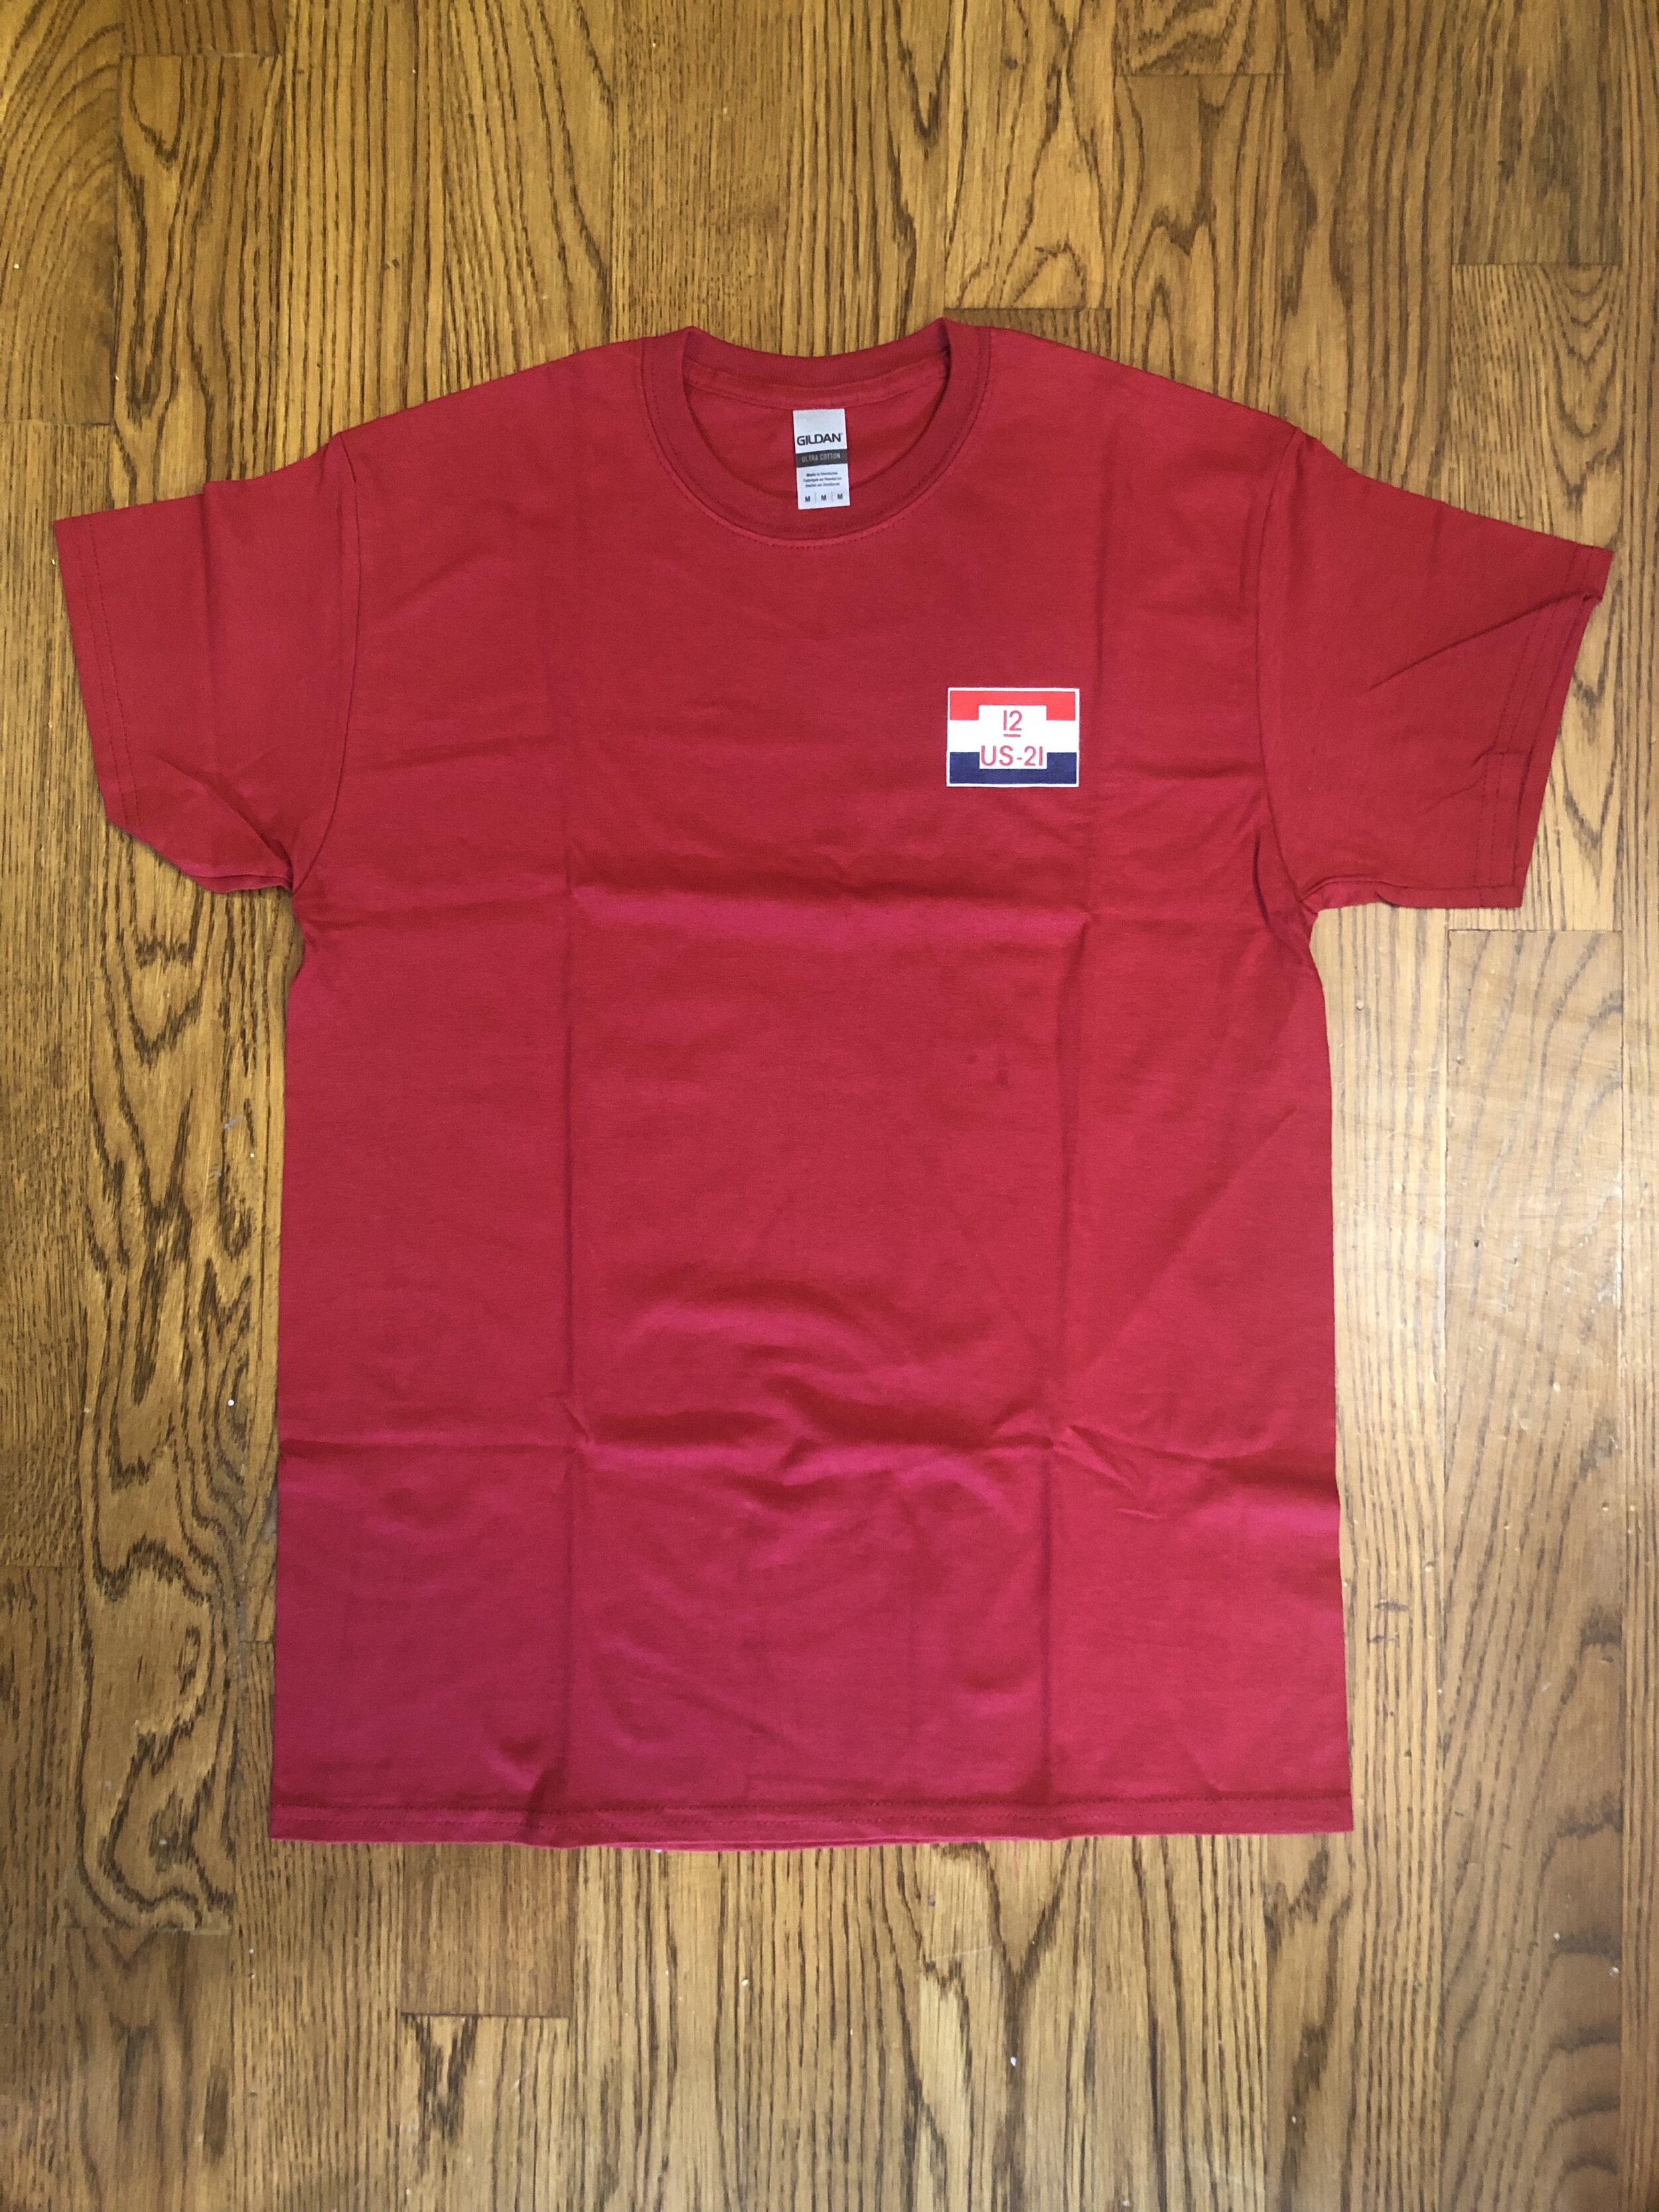 American Eagle Red Cotton Tee Shirt (Front) — American Eagle I2 US 2I